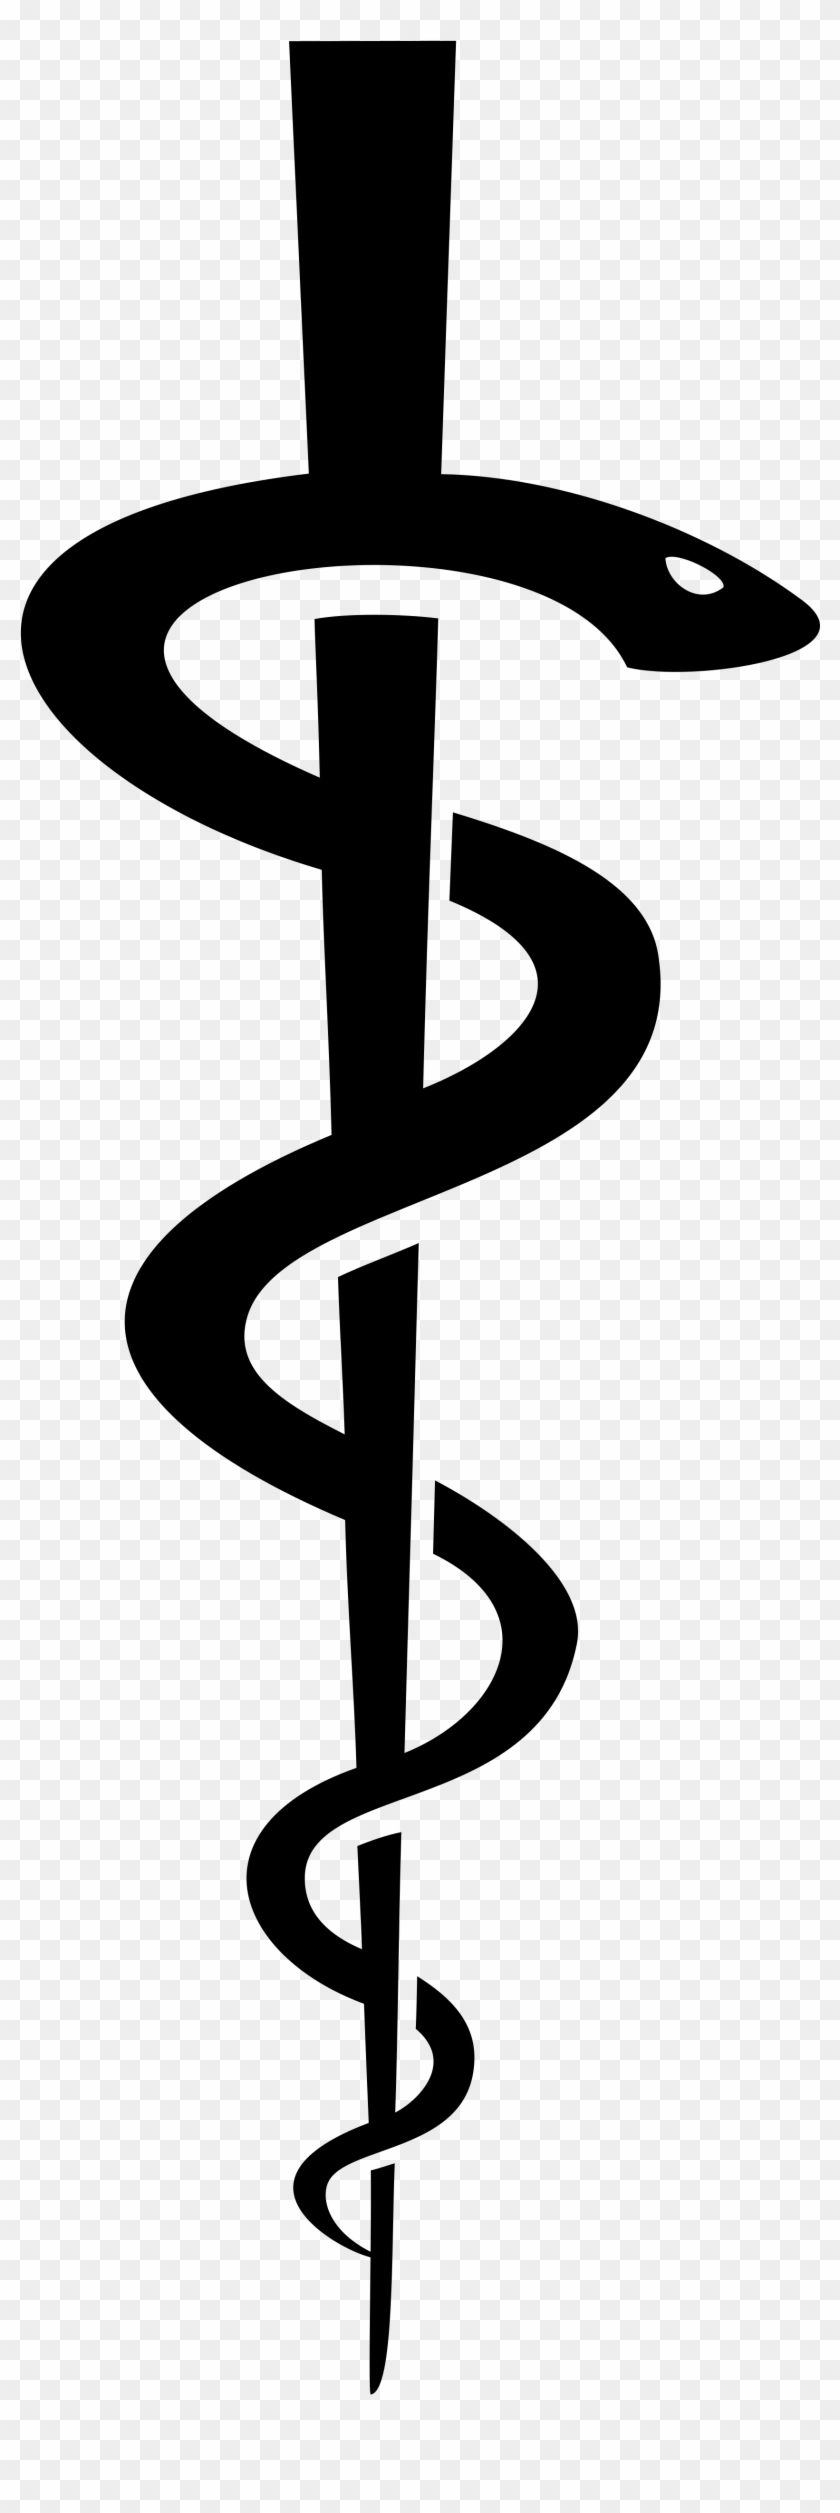 Caduceus Vector Rod - Rod Of Asclepius Png Clipart #4580057